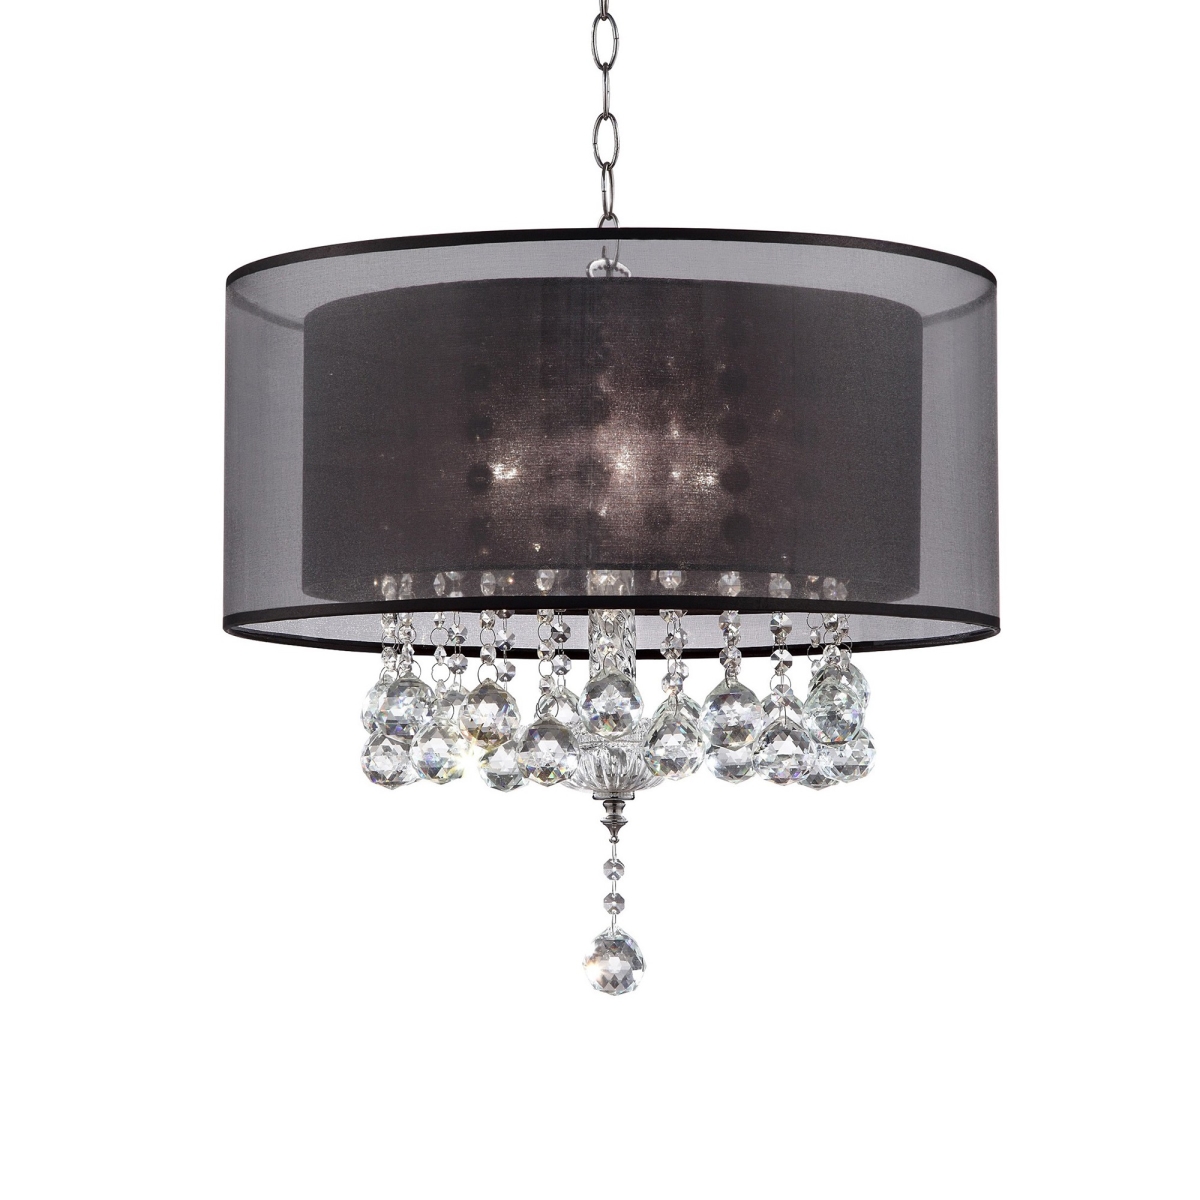 HomeRoots 468876 Contempo Silver Ceiling Lamp with Black Shade & Crystal Accents